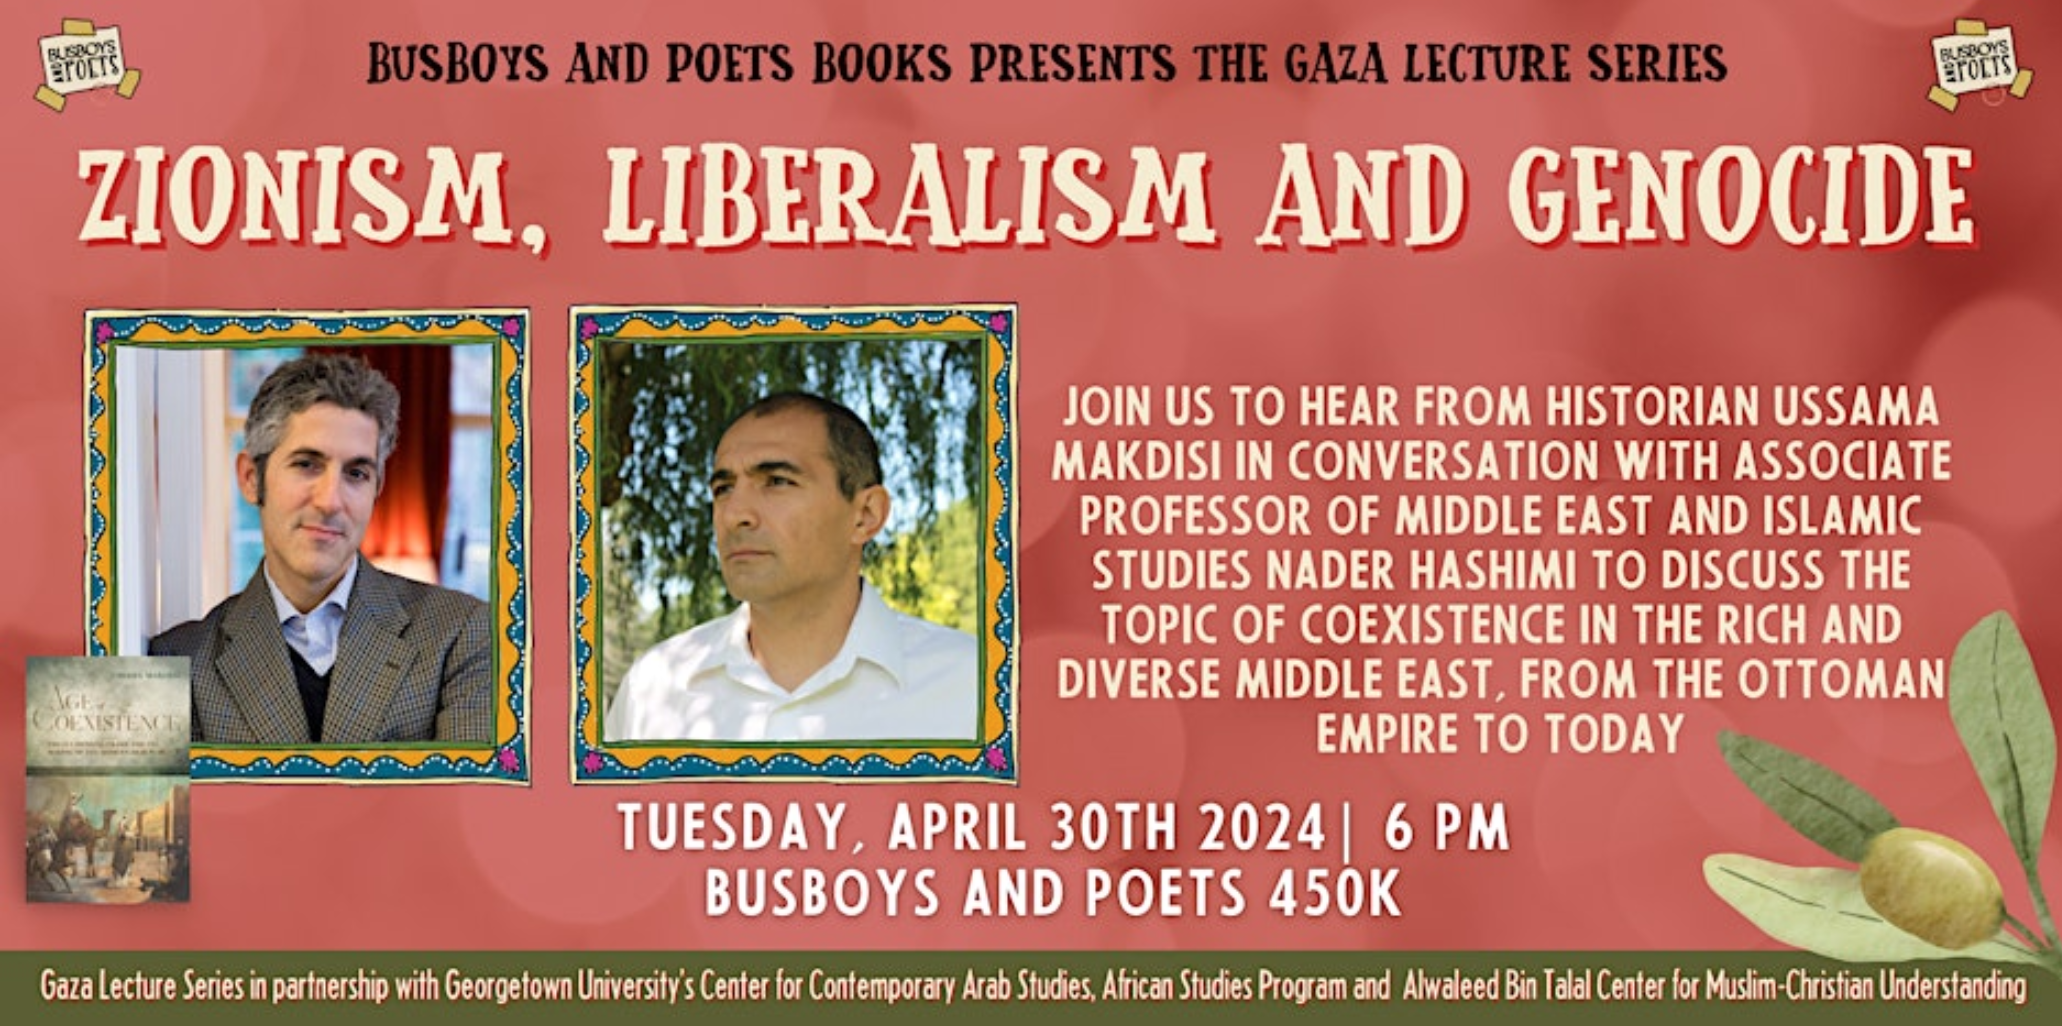 Zionism, Liberalism and Genocide: Gaza Lecture Series